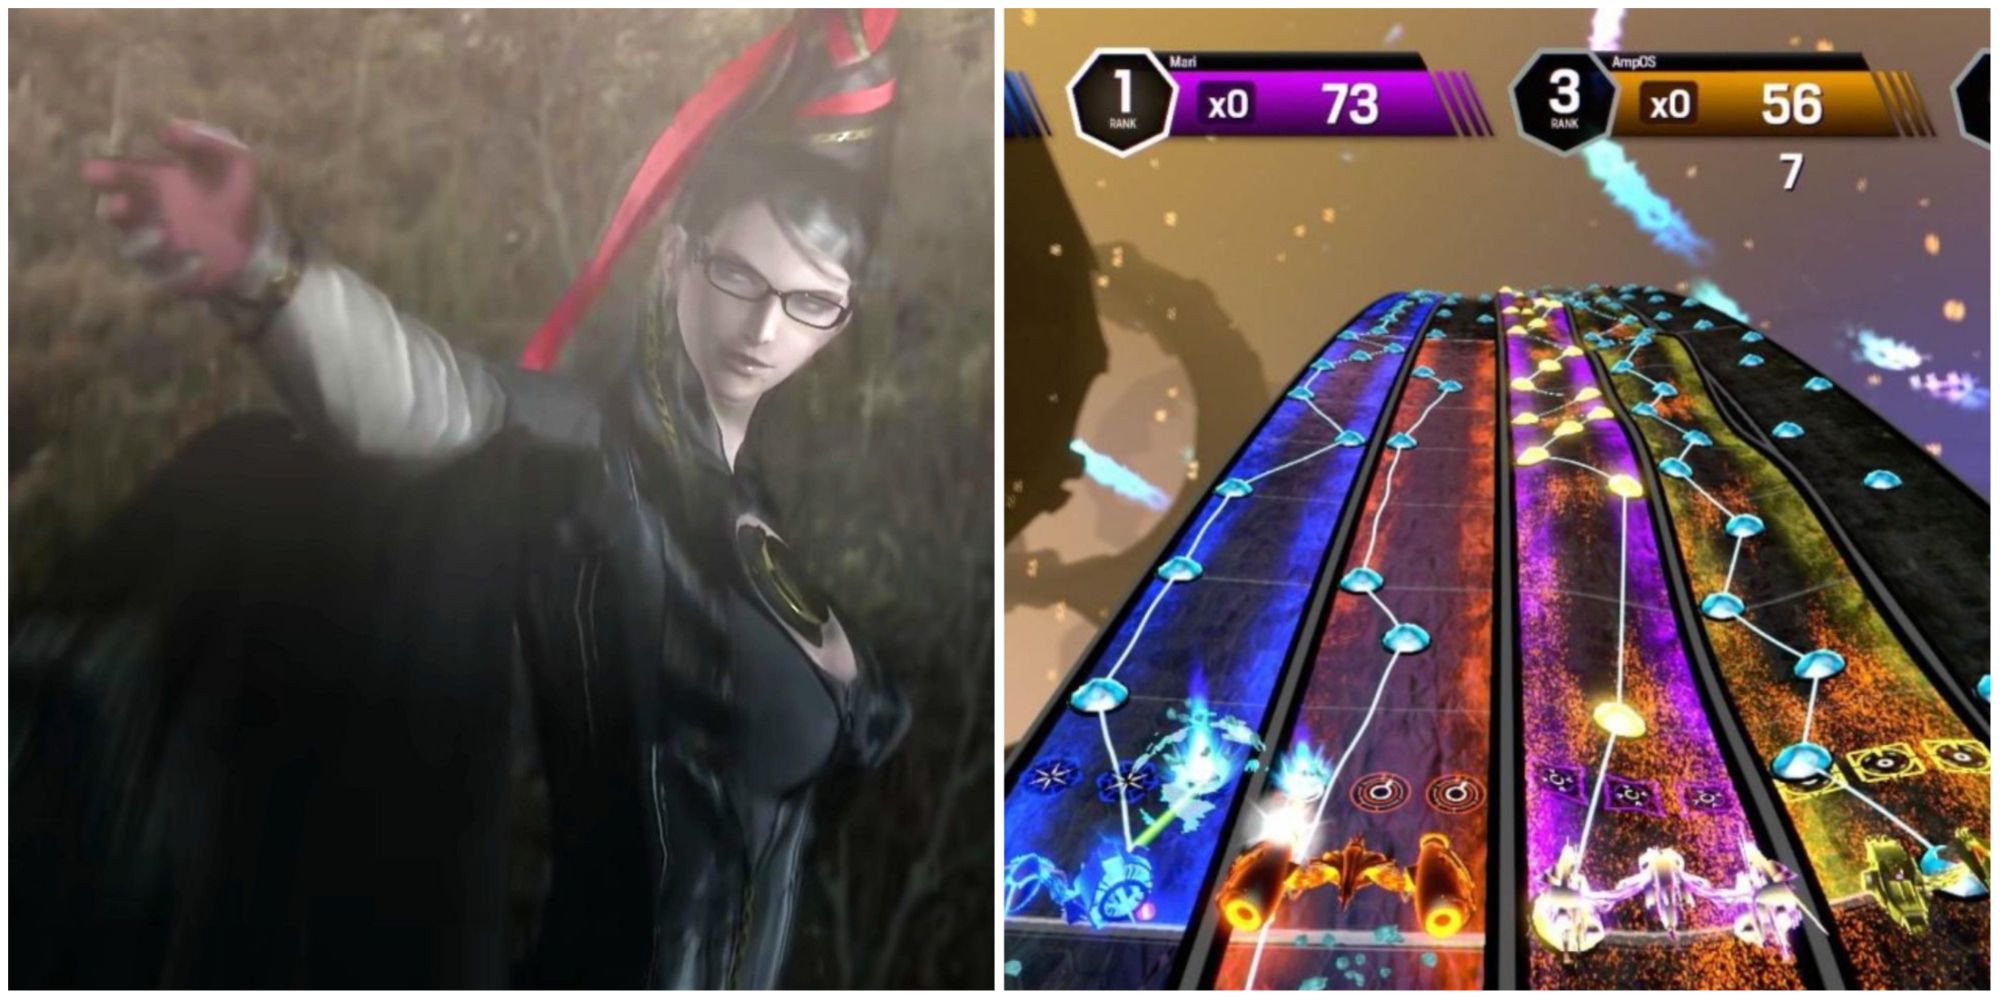 Bayonetta with her hand outstretched and a rhythm game